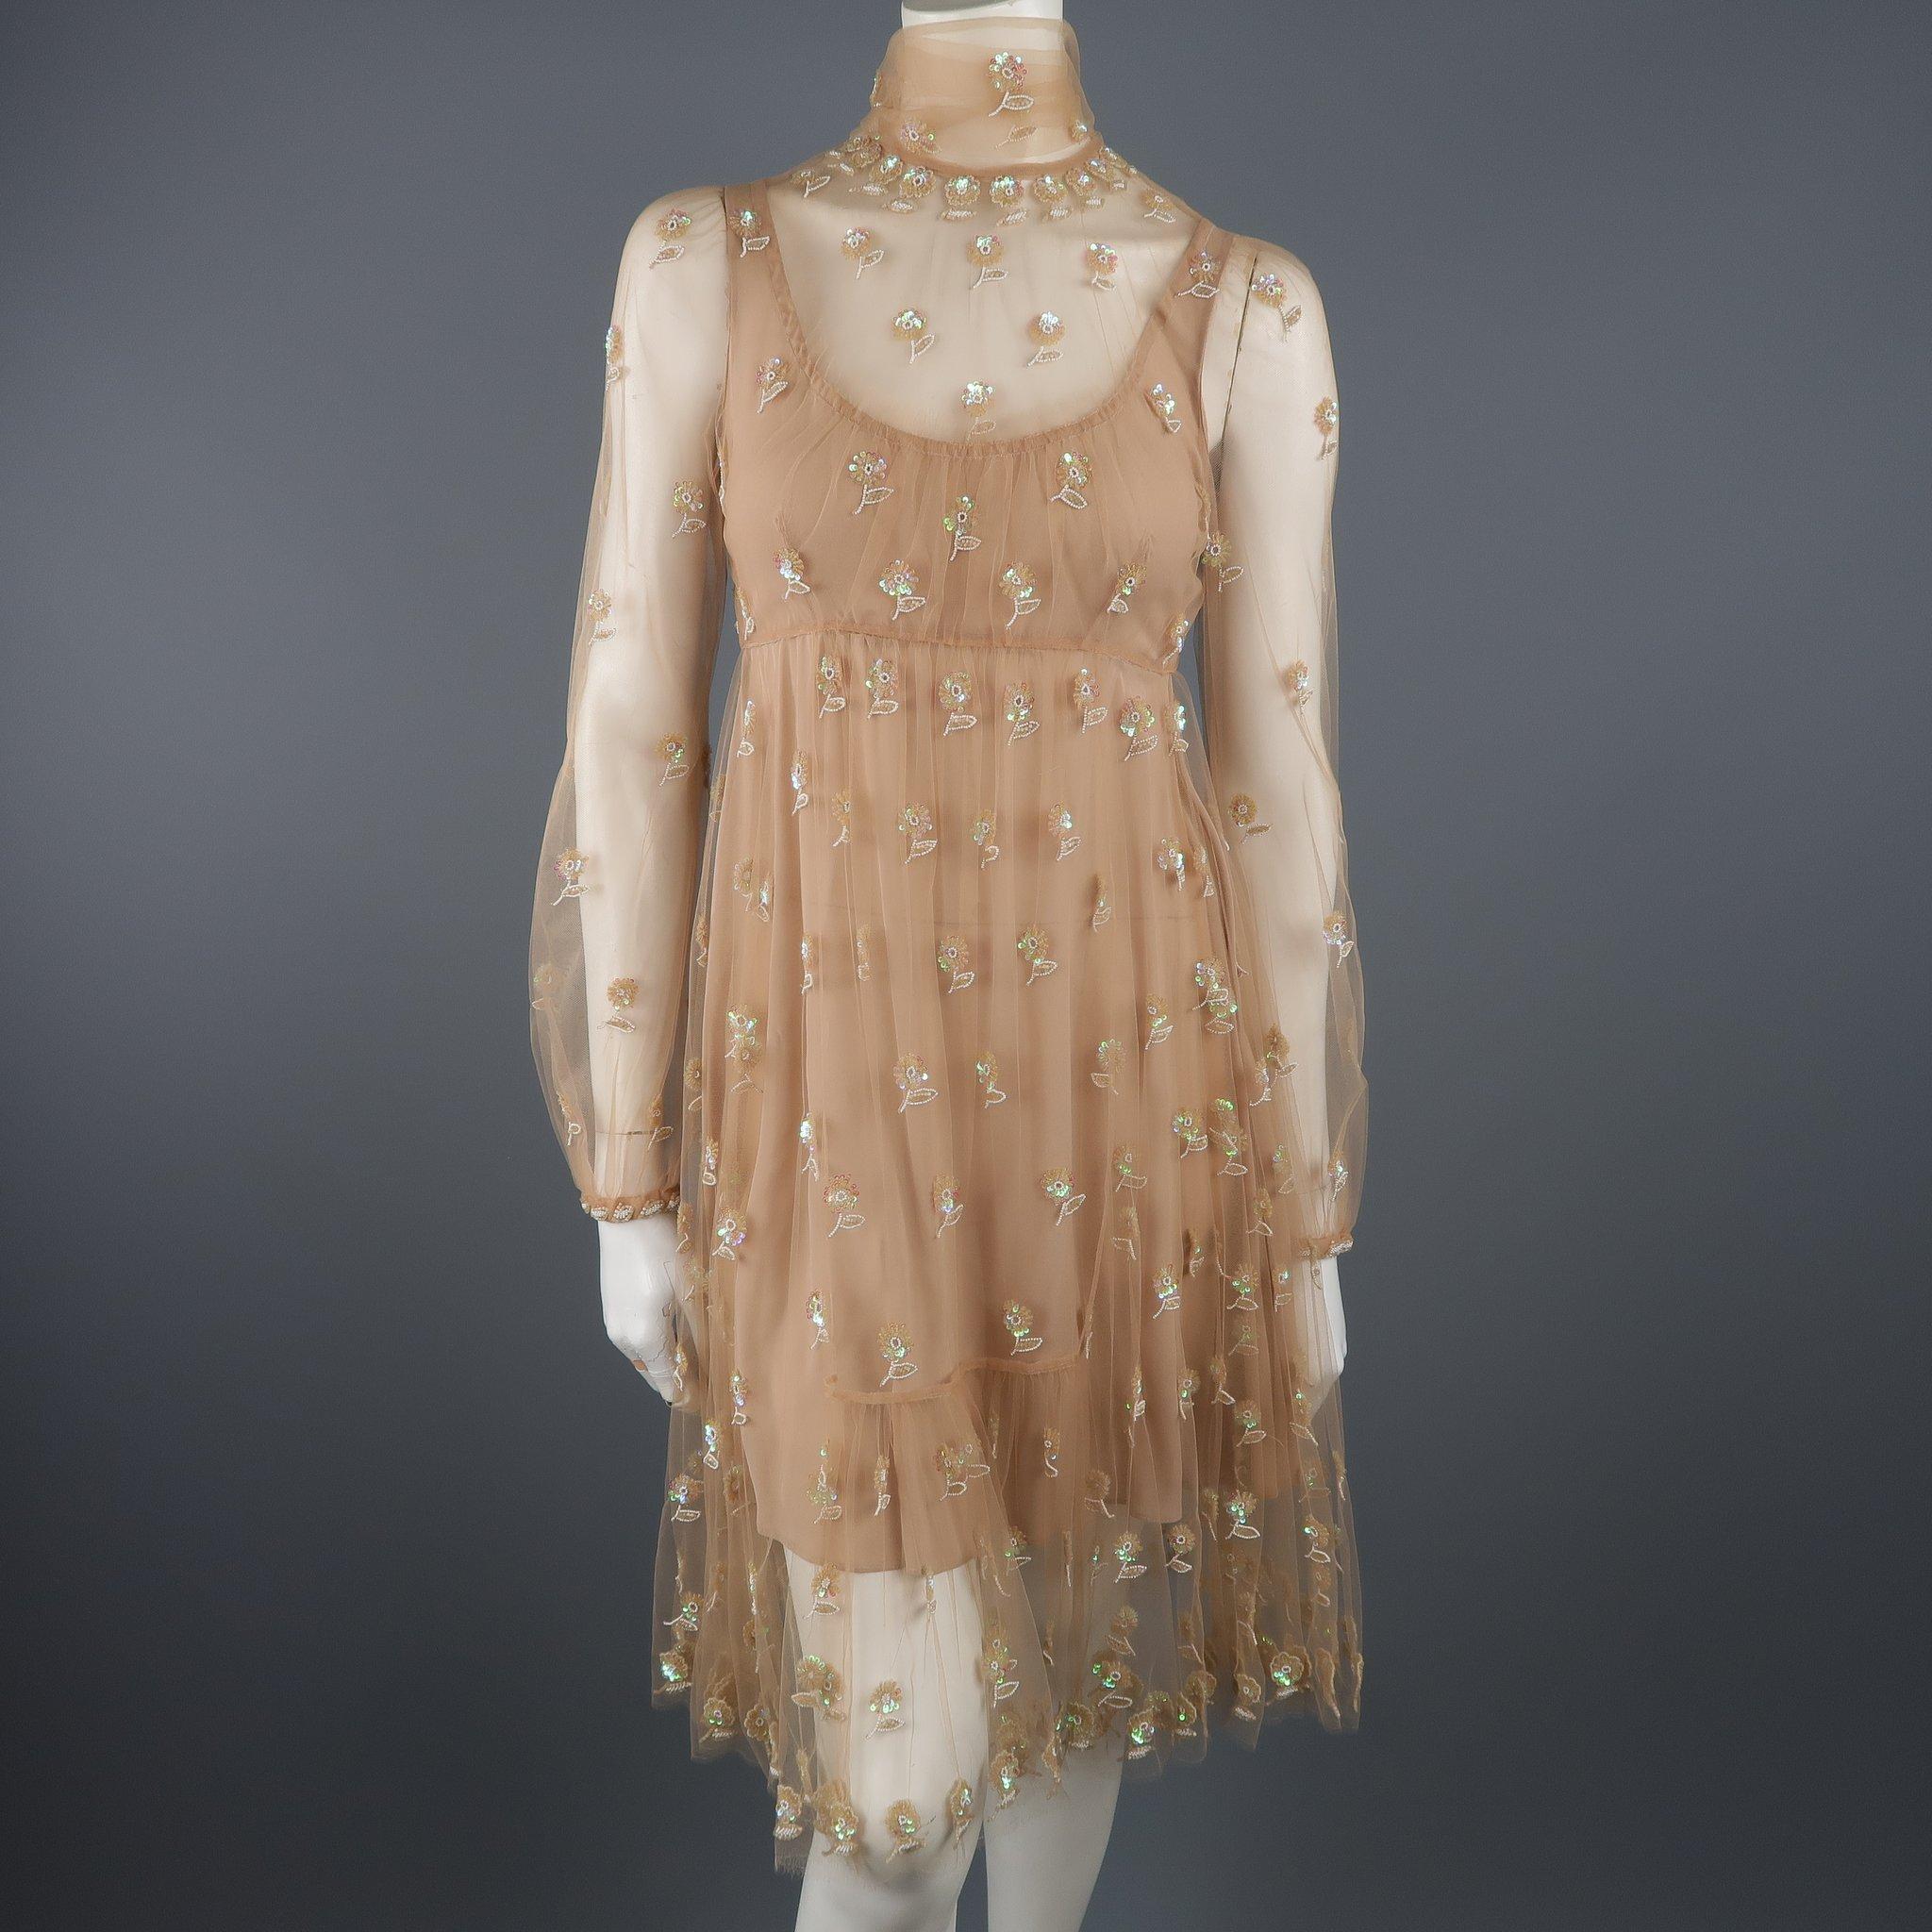 Valentino cocktail dress comes in tan tulle with all over beaded floral pattern, tied scarf neckline, long sleeves, full skirt, and silk lining. Made in Italy.
 
Excellent Pre-Owned Condition.
Marked: (no size)
 
Measurements:
 
Shoulder: 12